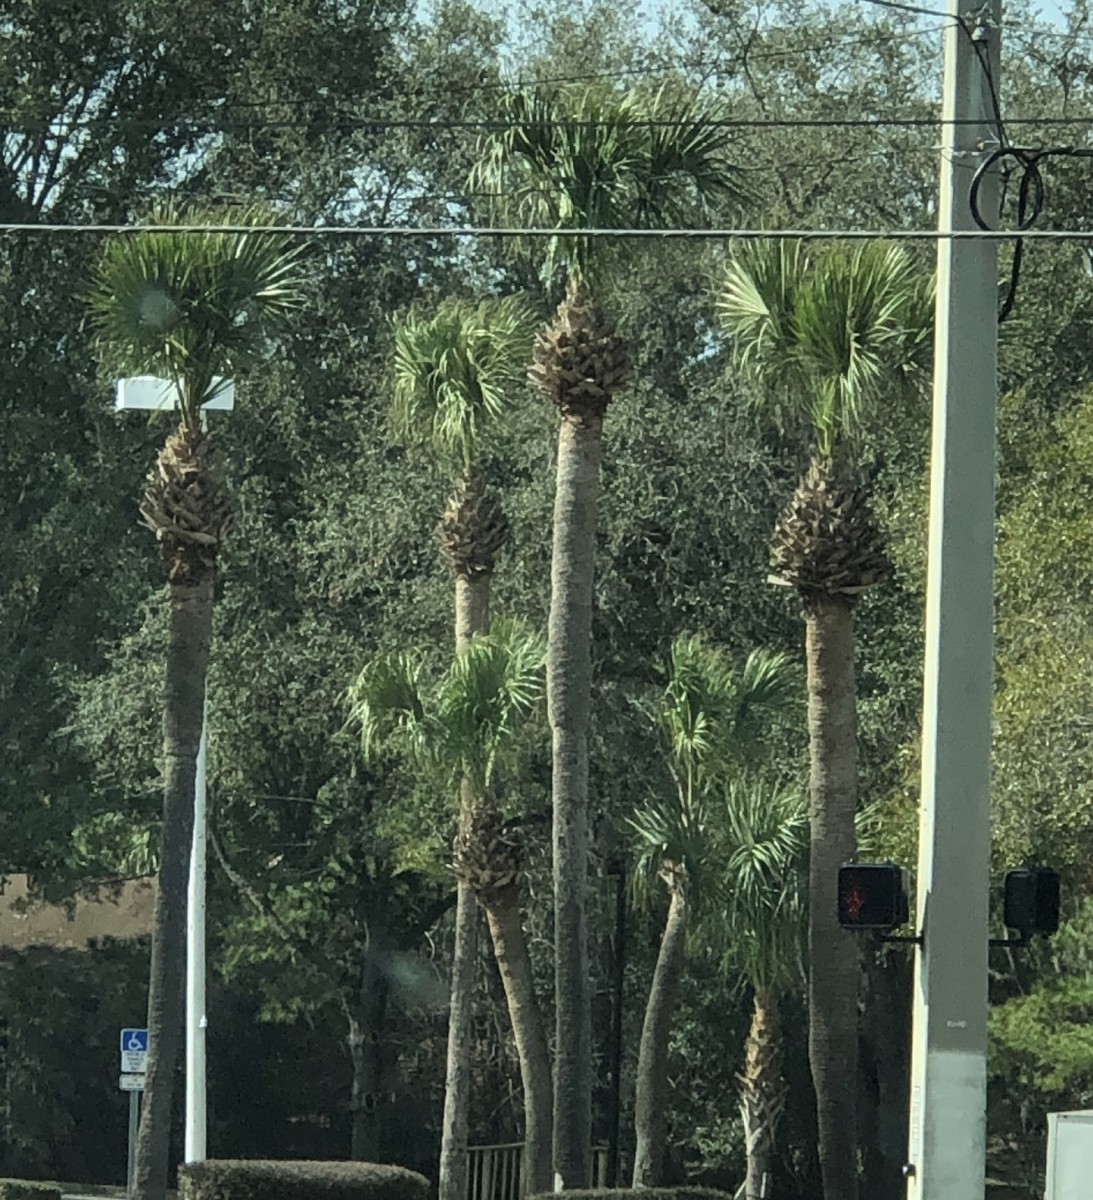 These Cabbage Palms have suffered not only a hurricane cut but also a pineapple cut. The pineapple cut involves removing all but the top boots, and trimming them so that the palm resembles a pineapple plant.